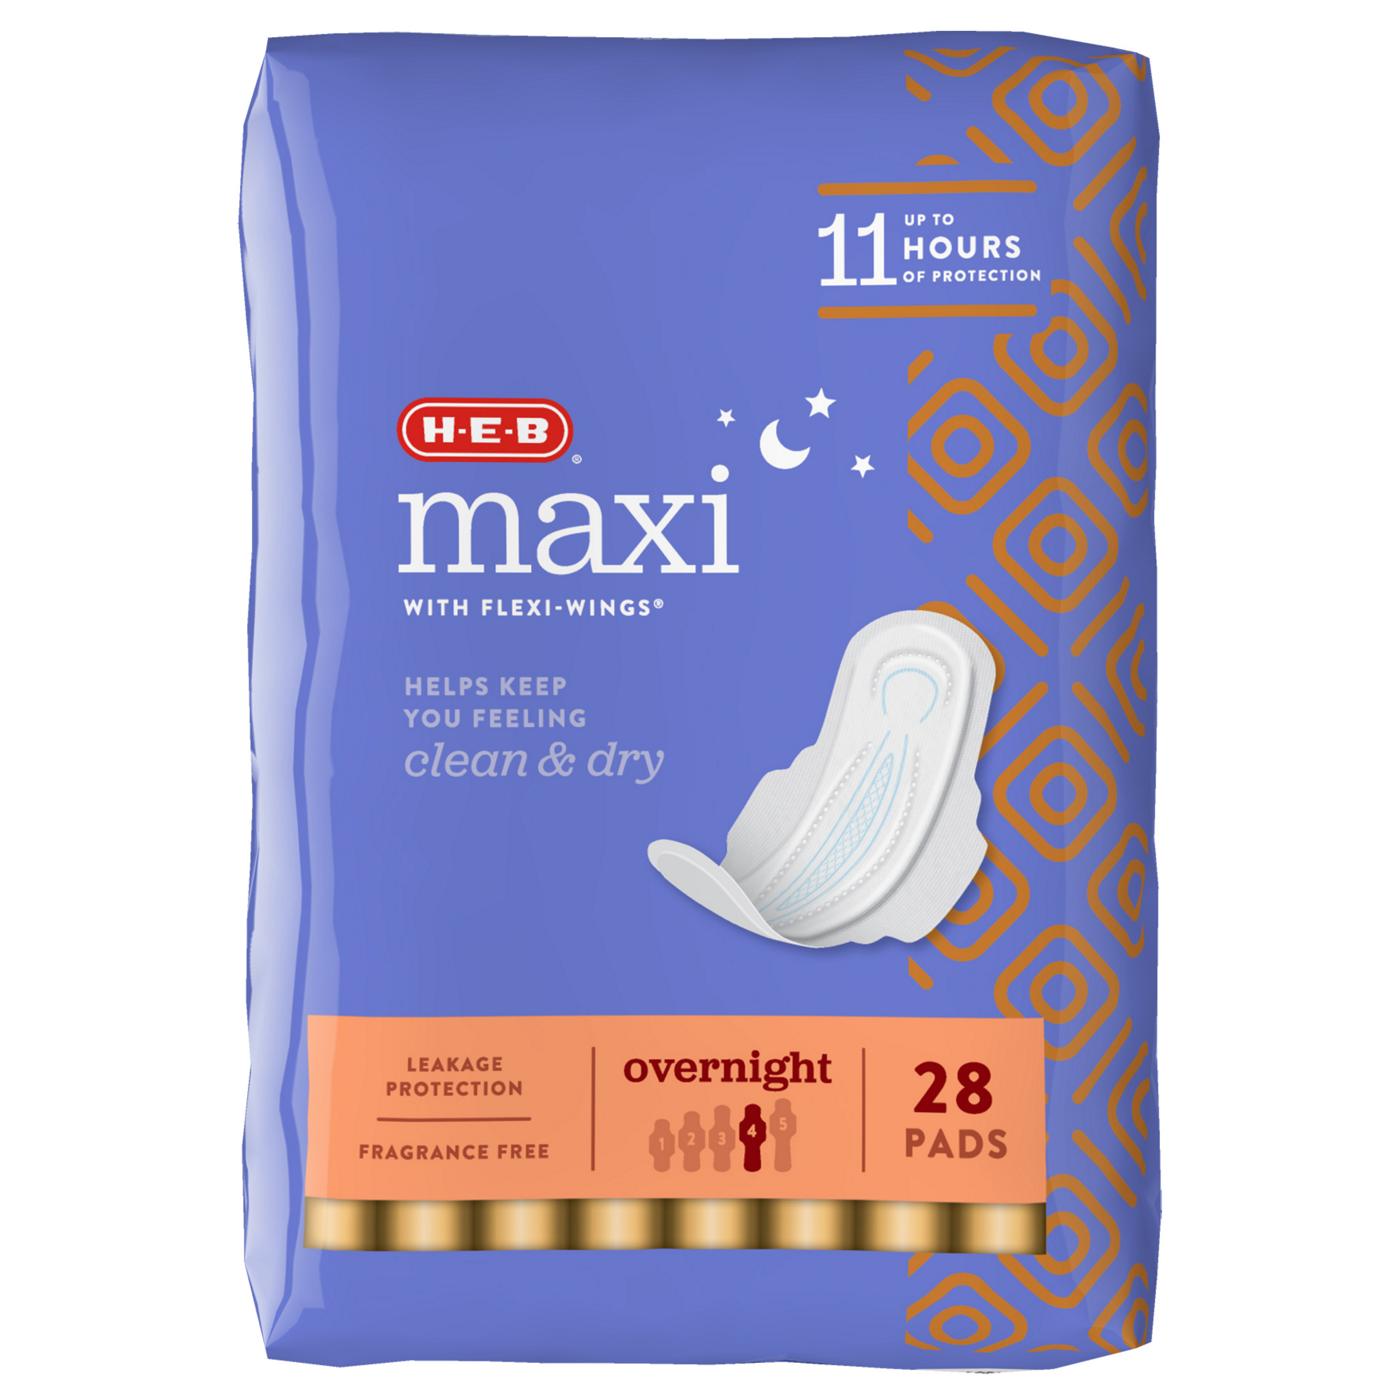 H-E-B Maxi with Flexi-Wings Overnight Pads; image 6 of 7